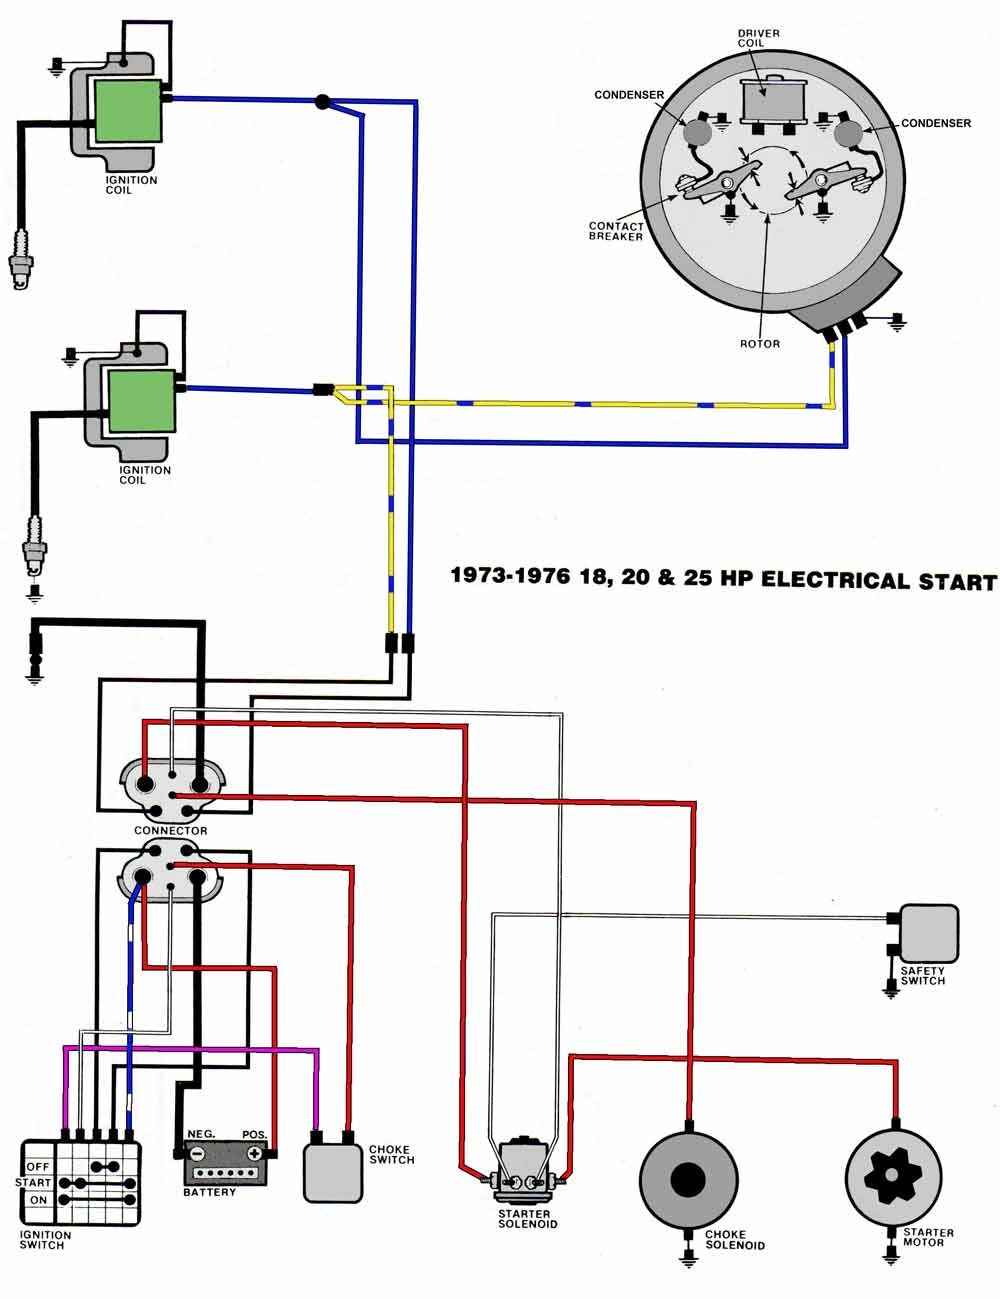 Solenoid Wiring Diagram Evinrude 1970 25 Hp How Do I Wire The StartersolenoidBattery And Wiring Diagram